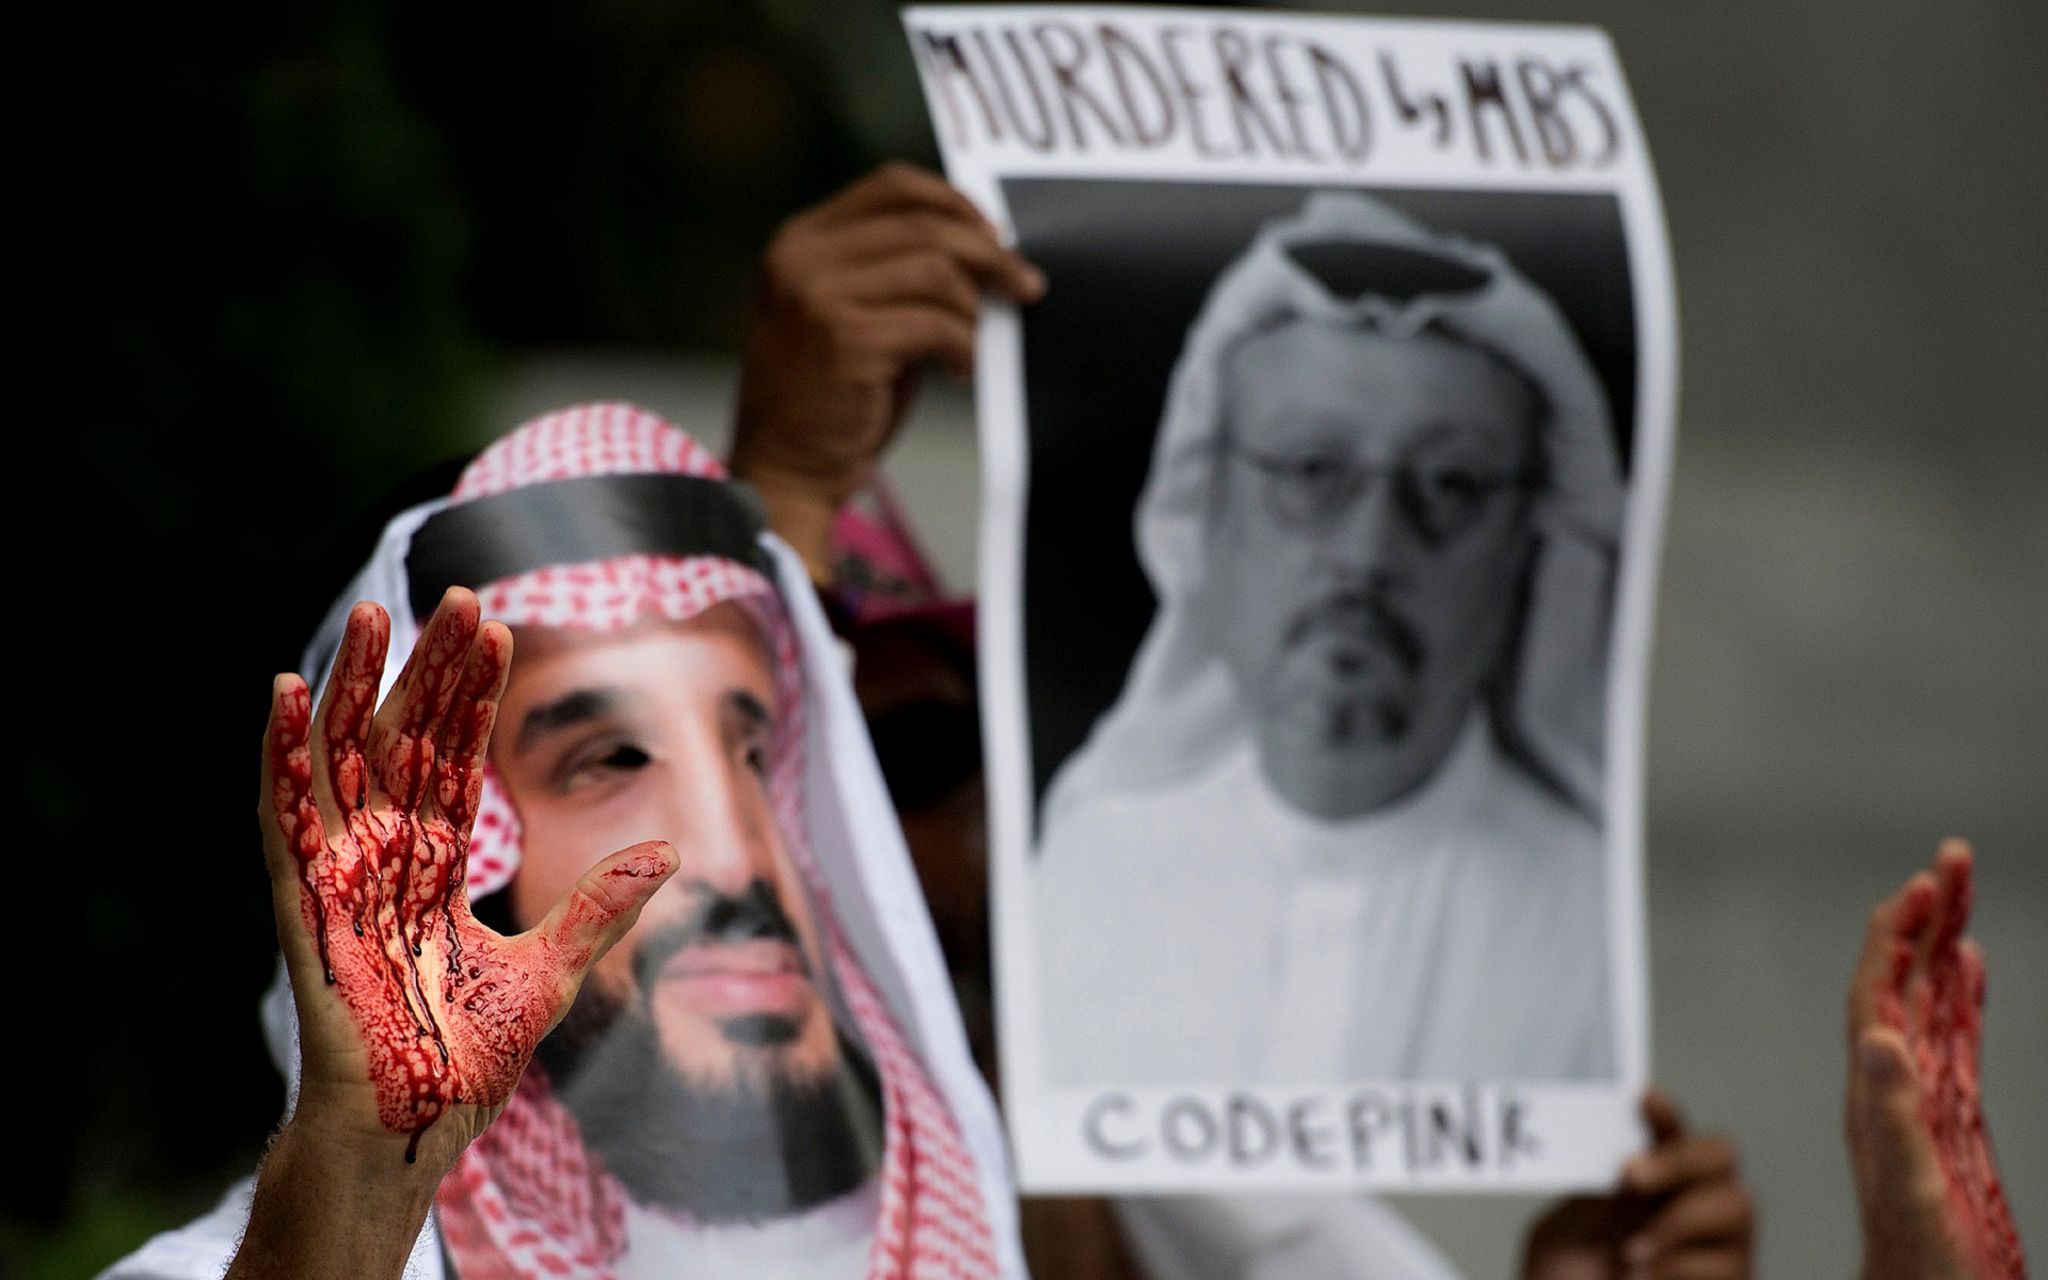 A demonstrator dressed as Saudi Arabian Crown Prince Mohammed bin Salman with blood on his hands protests outside the Saudi Embassy in Washington DC, October 2018